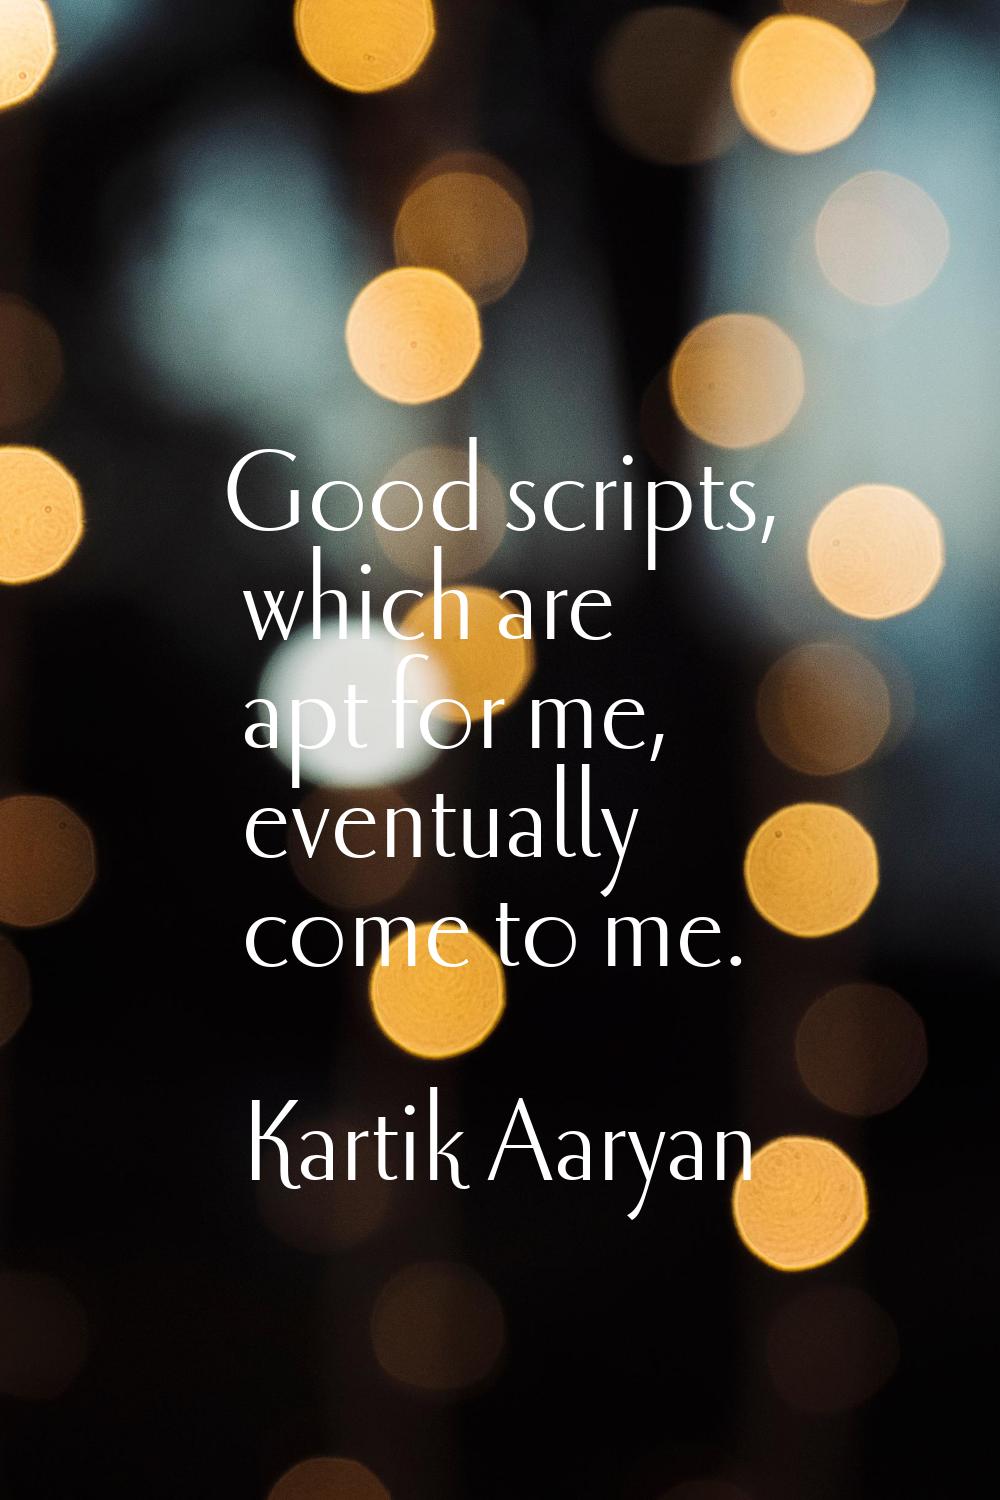 Good scripts, which are apt for me, eventually come to me.